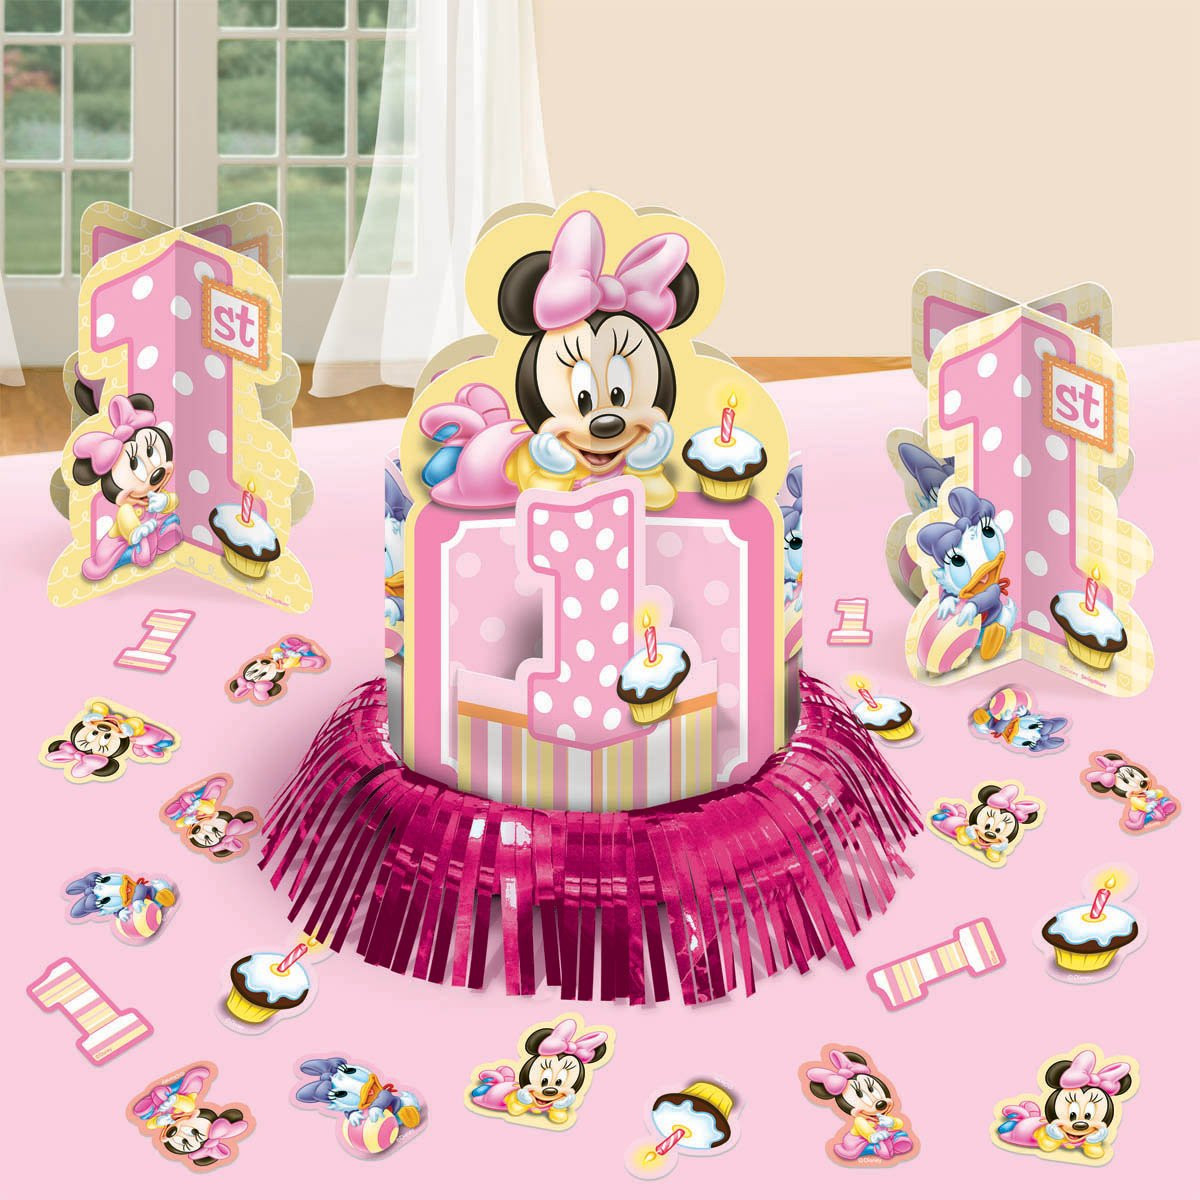 Baby Minnie Mouse 1St Birthday Party Supplies
 Baby Minnie Mouse Decorations